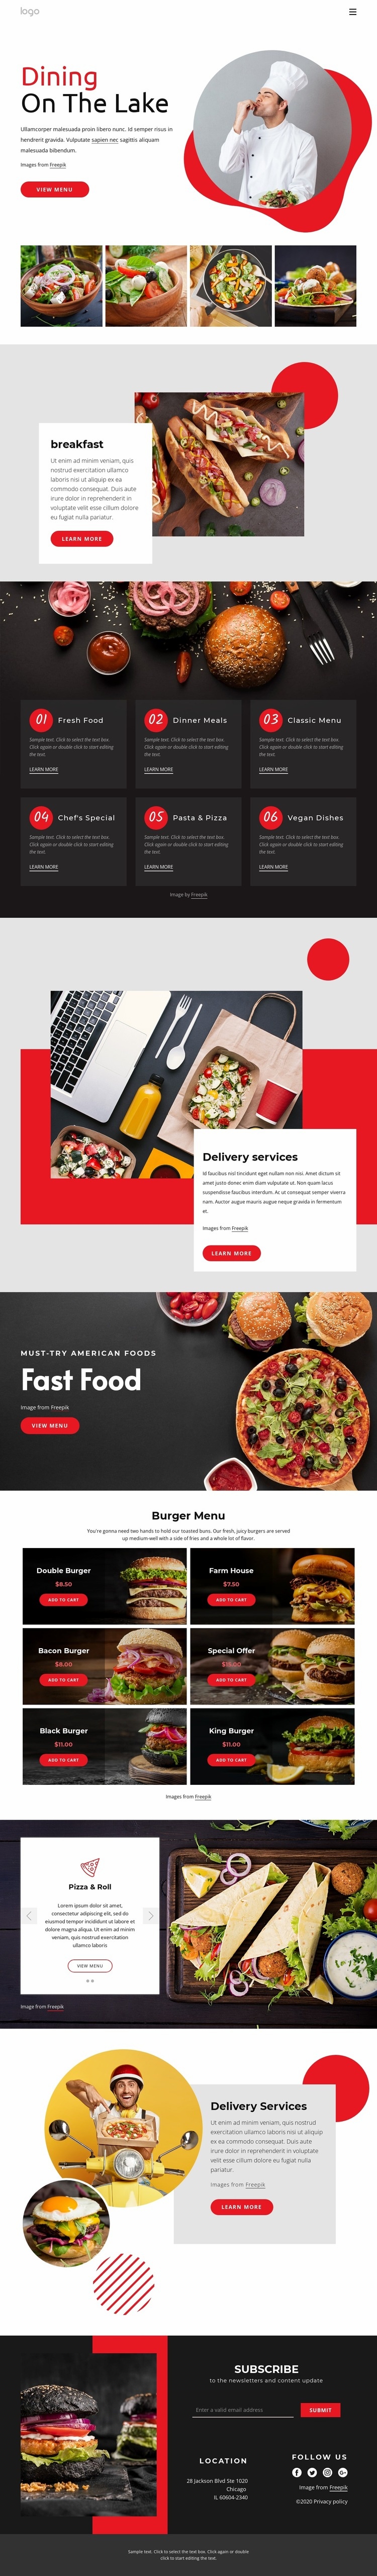 Dining on the lake Squarespace Template Alternative